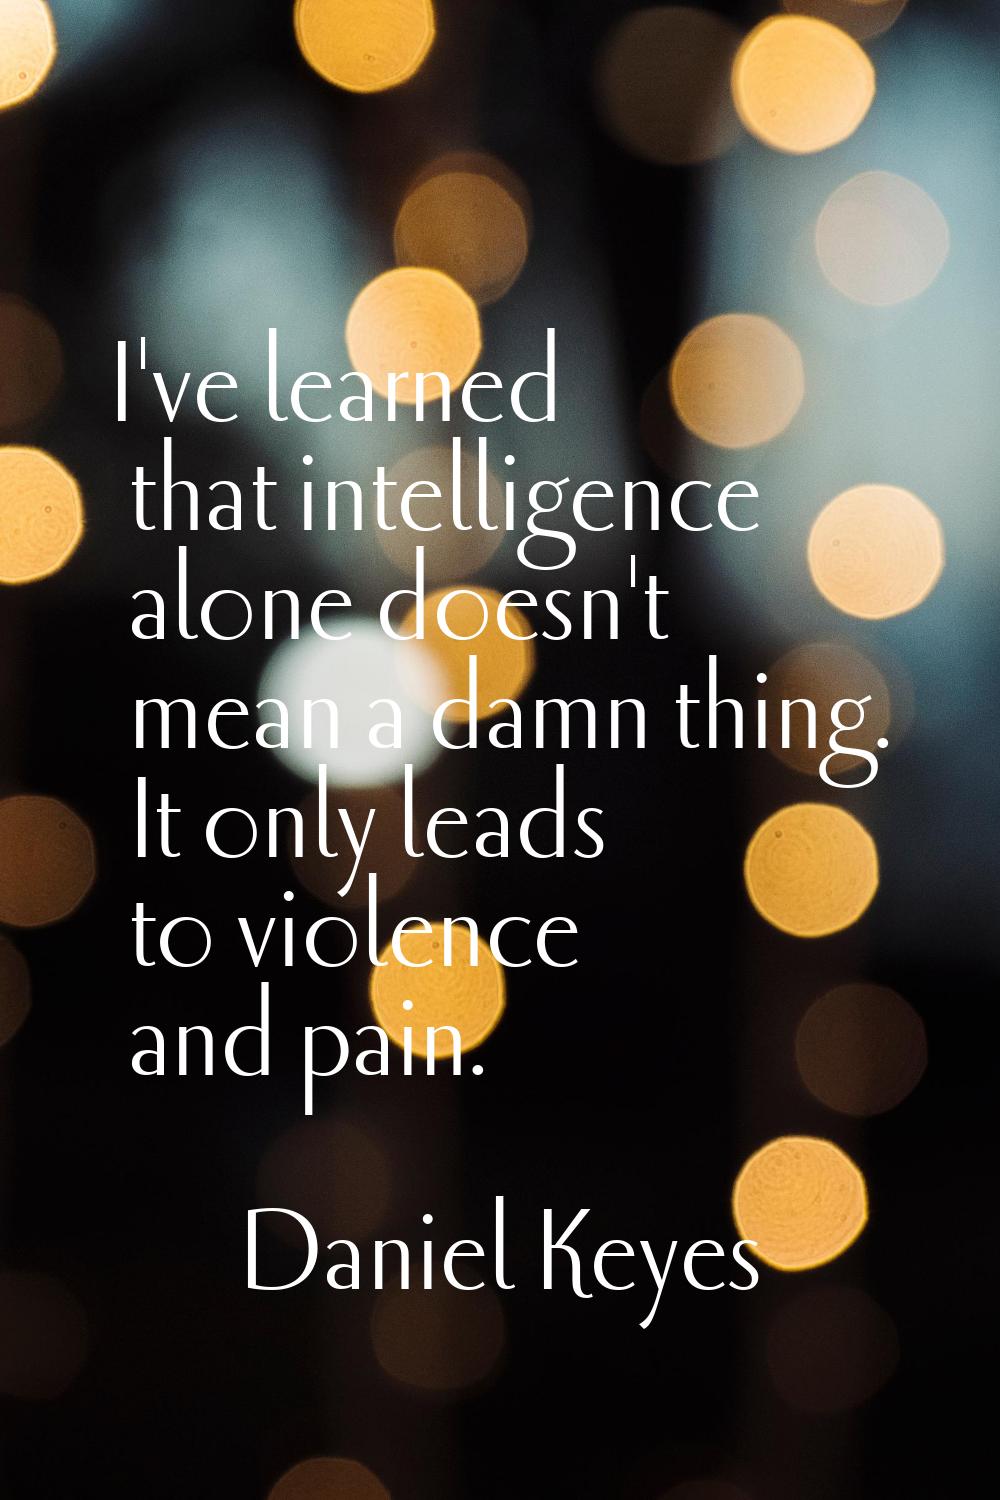 I've learned that intelligence alone doesn't mean a damn thing. It only leads to violence and pain.